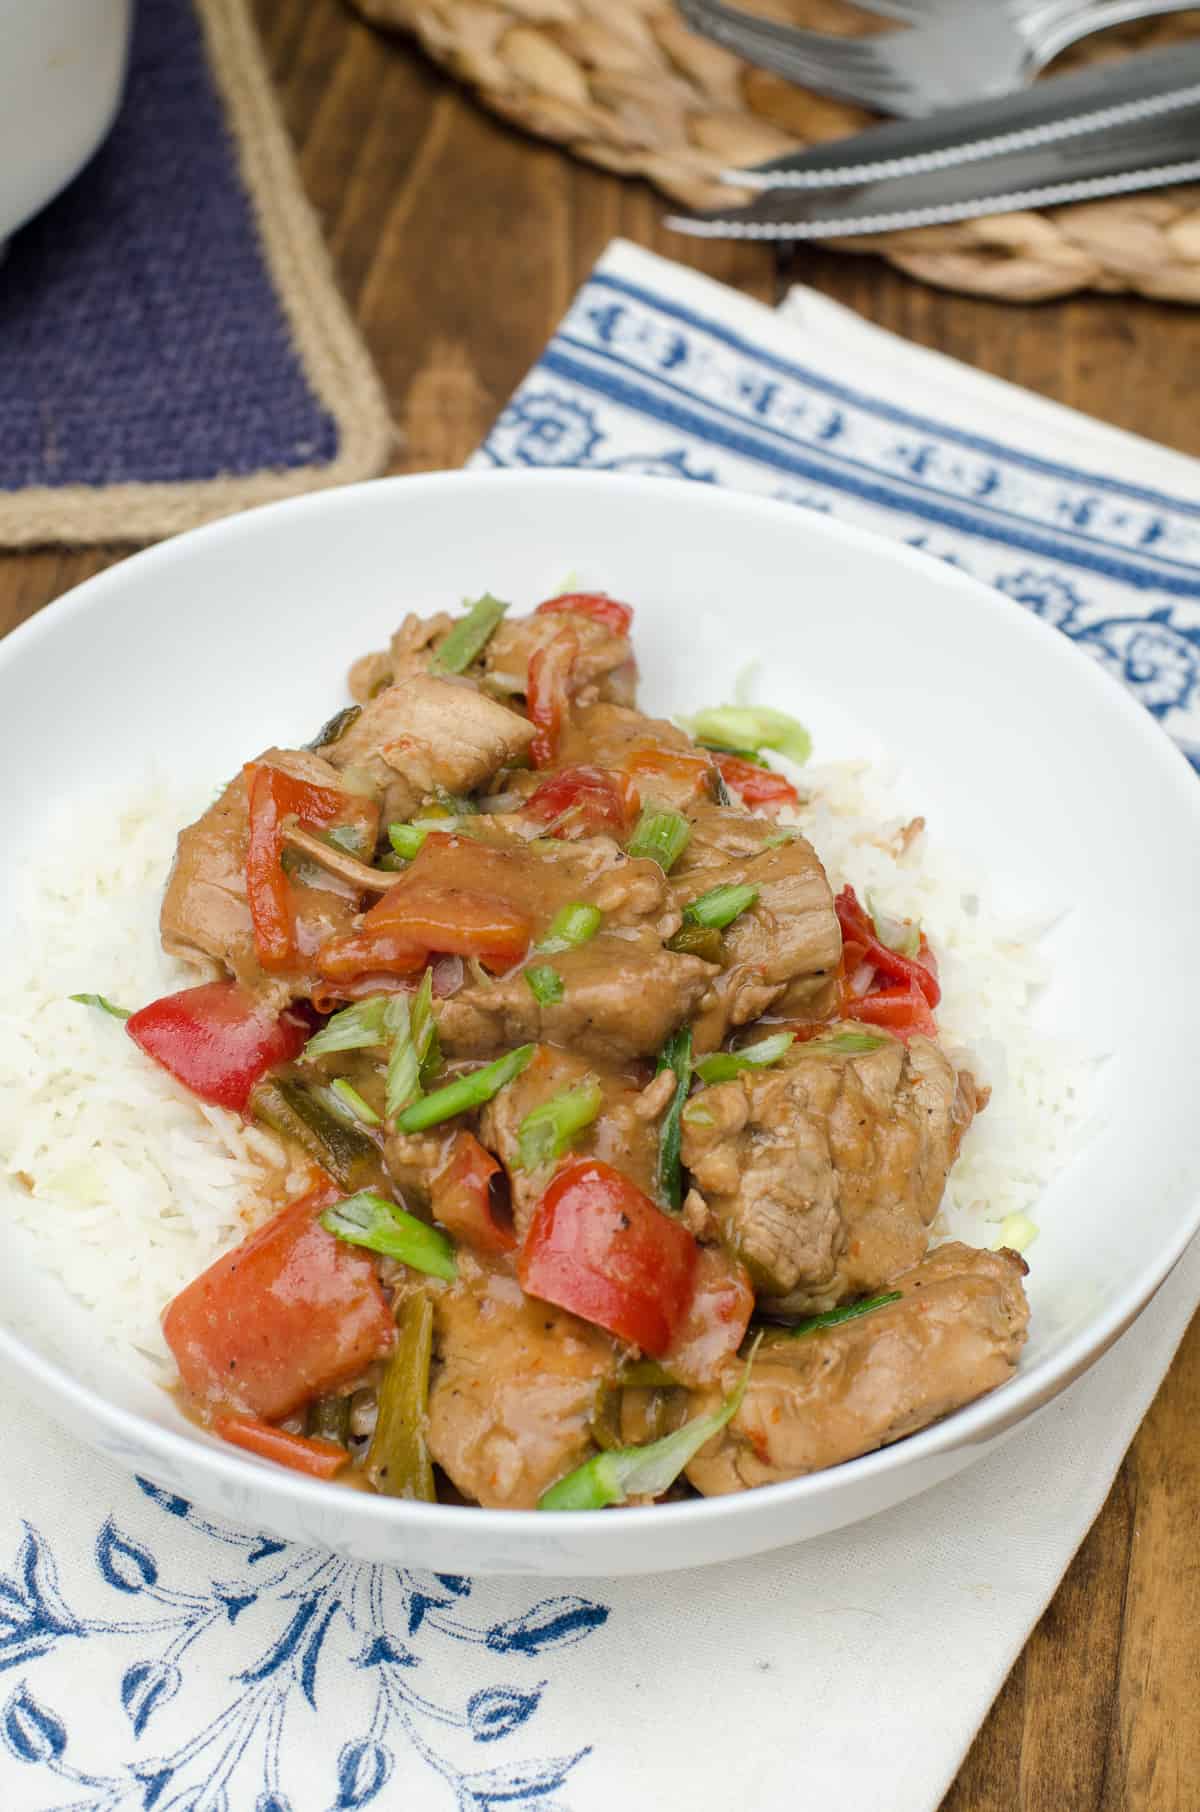 Cooked pork with red bell pepper on rice in a white bowl.